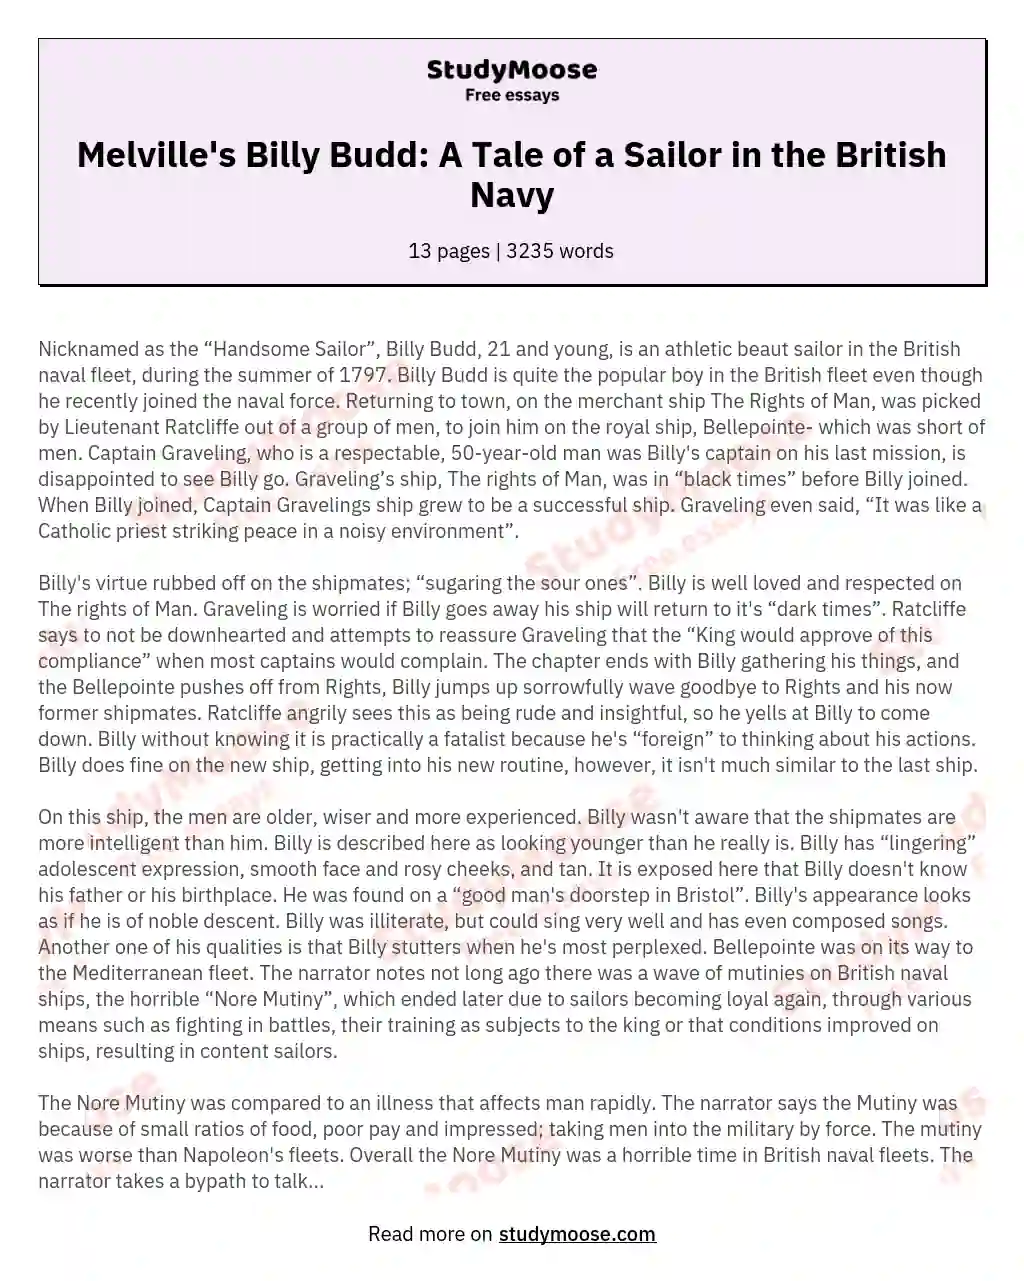 Melville's Billy Budd: A Tale of a Sailor in the British Navy essay